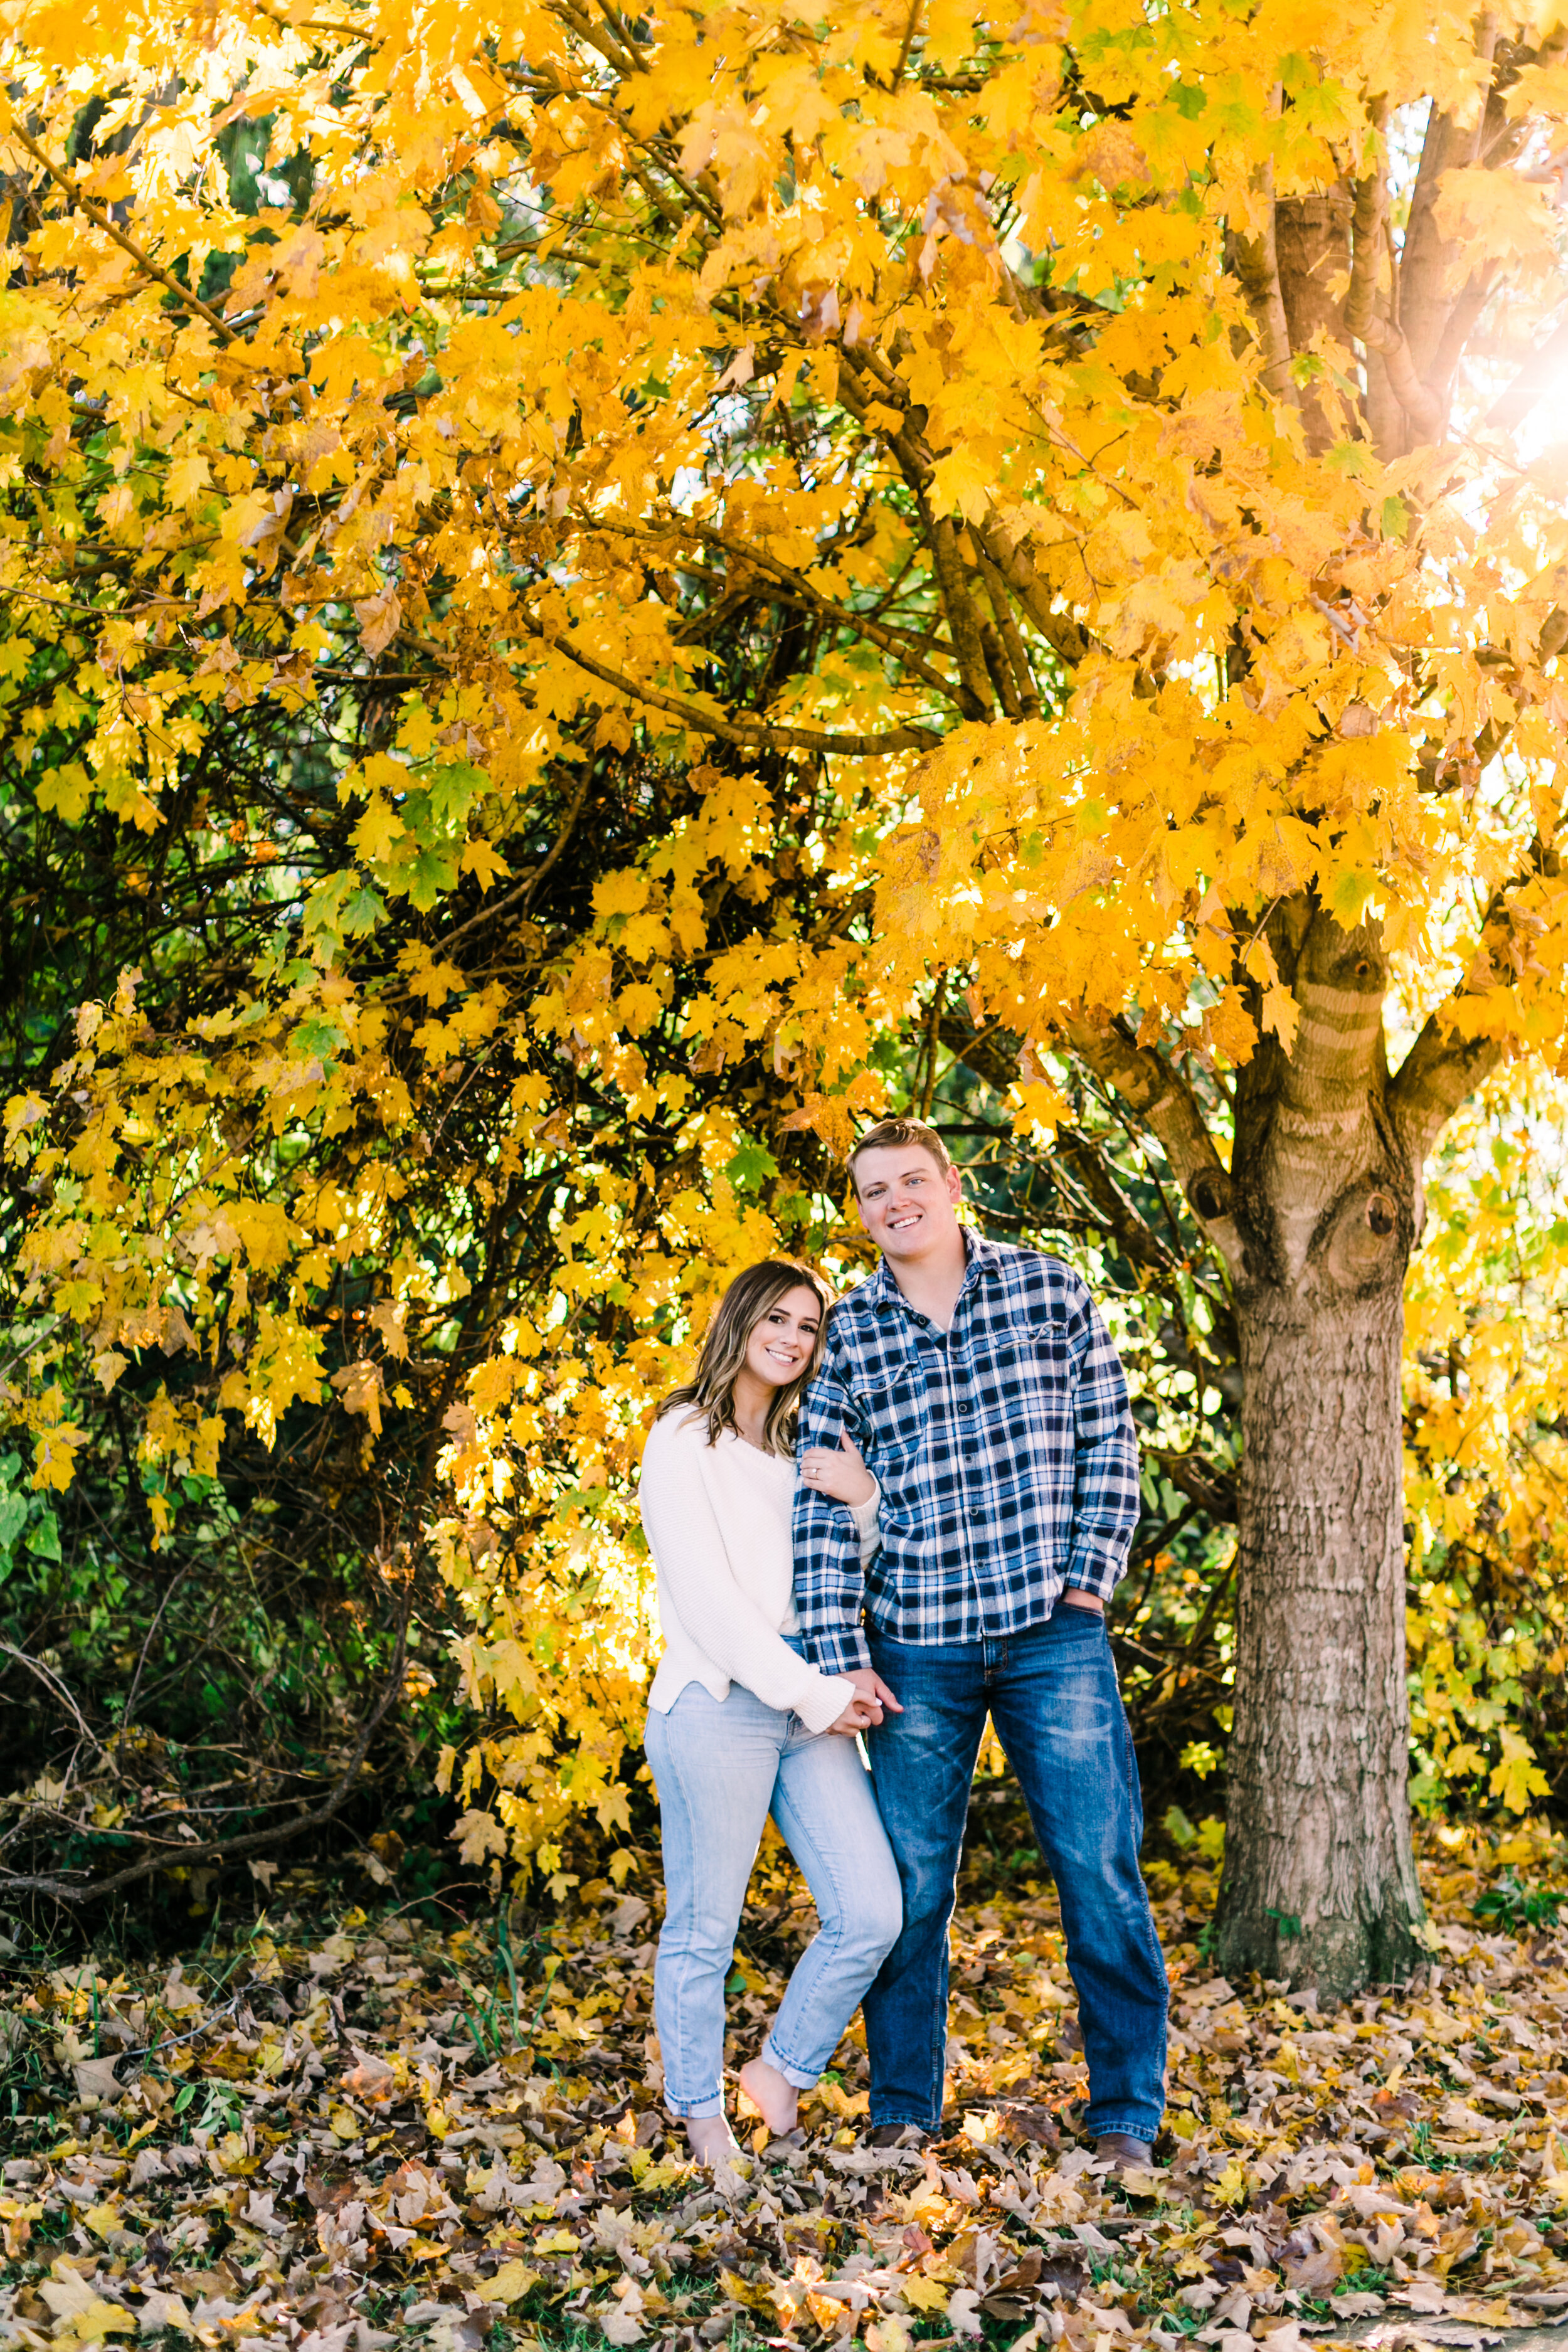 Tennessee+Fall+Engagement+Photos+Puppy (21 of 63).jpg